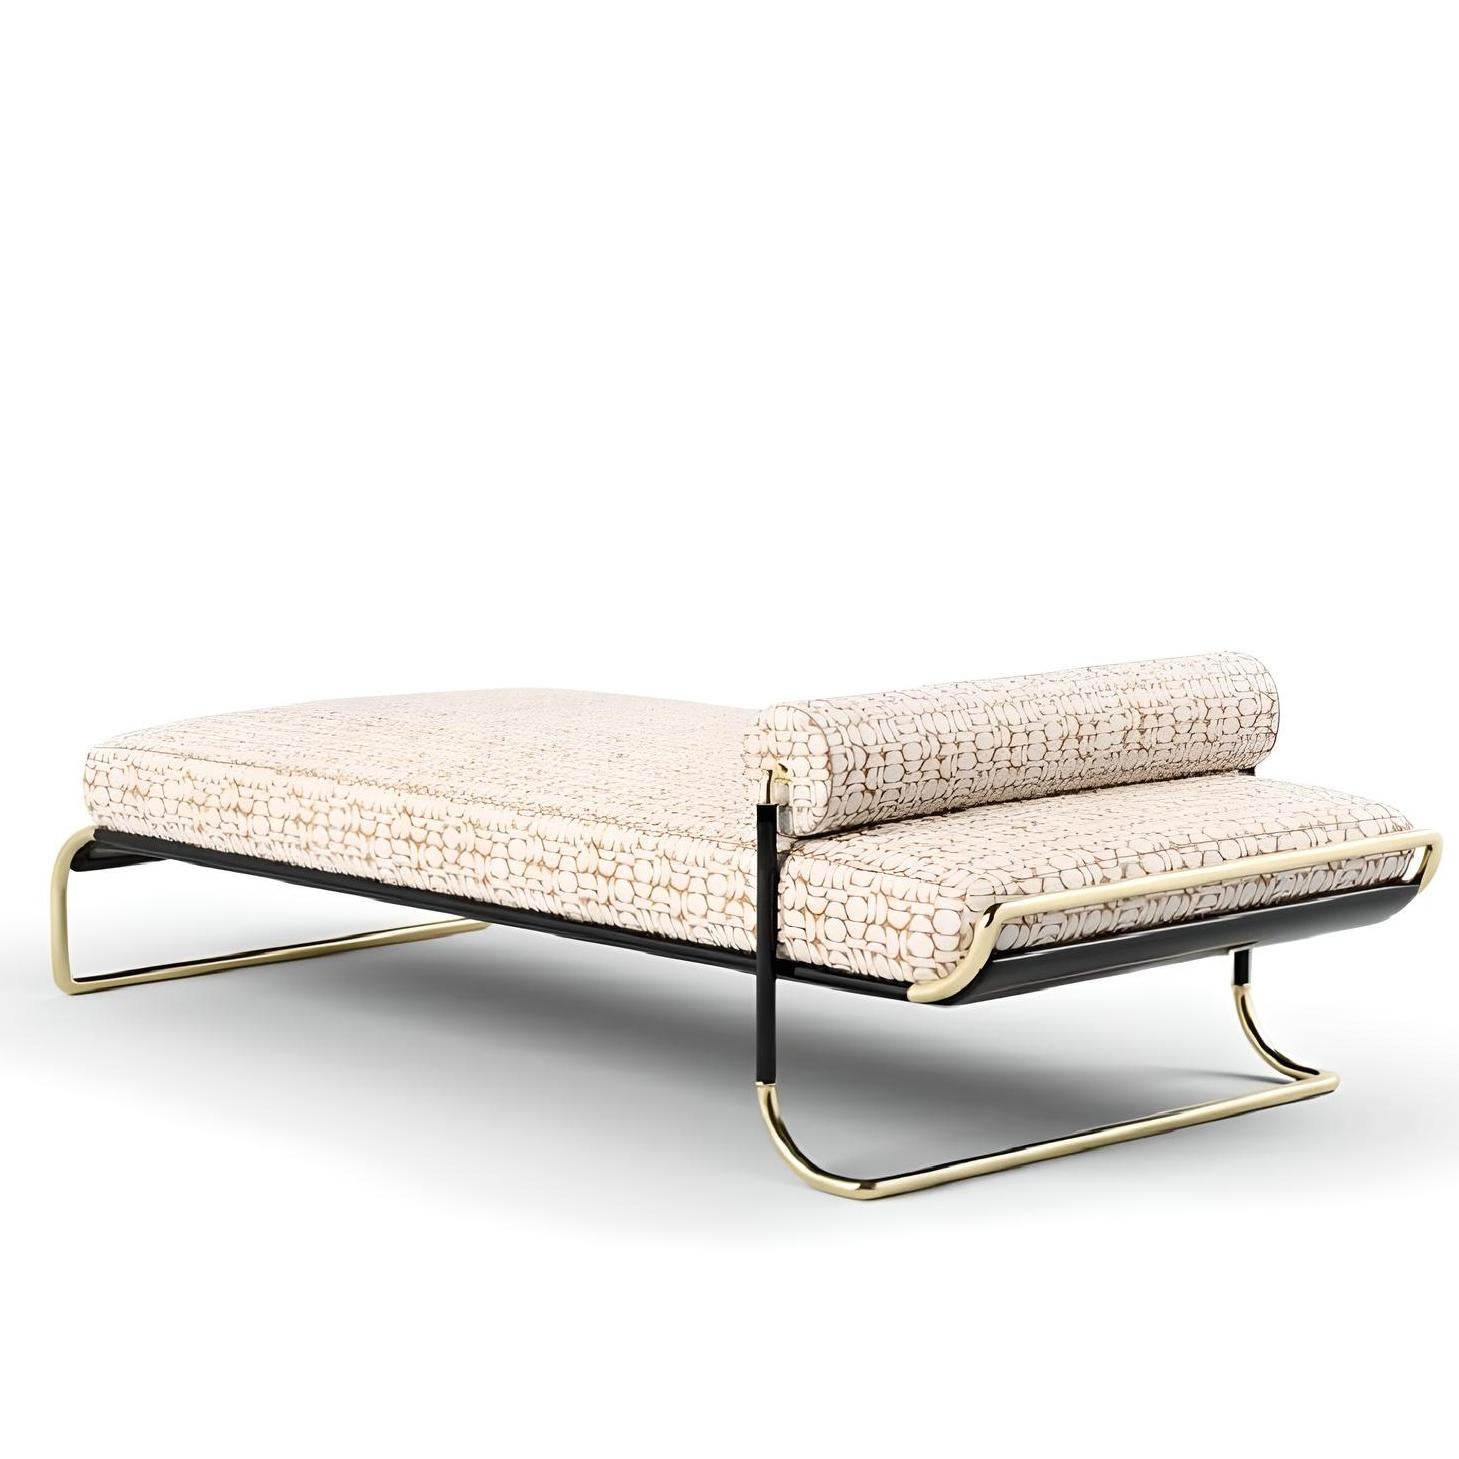 Presenting a breathtaking day bed exuding timeless elegance in its design. Combining brass craftsmanship with lacquered panels, its structure features gracefully curved cylindrical brass elements adorned with lacquered finishes. Ideal for both